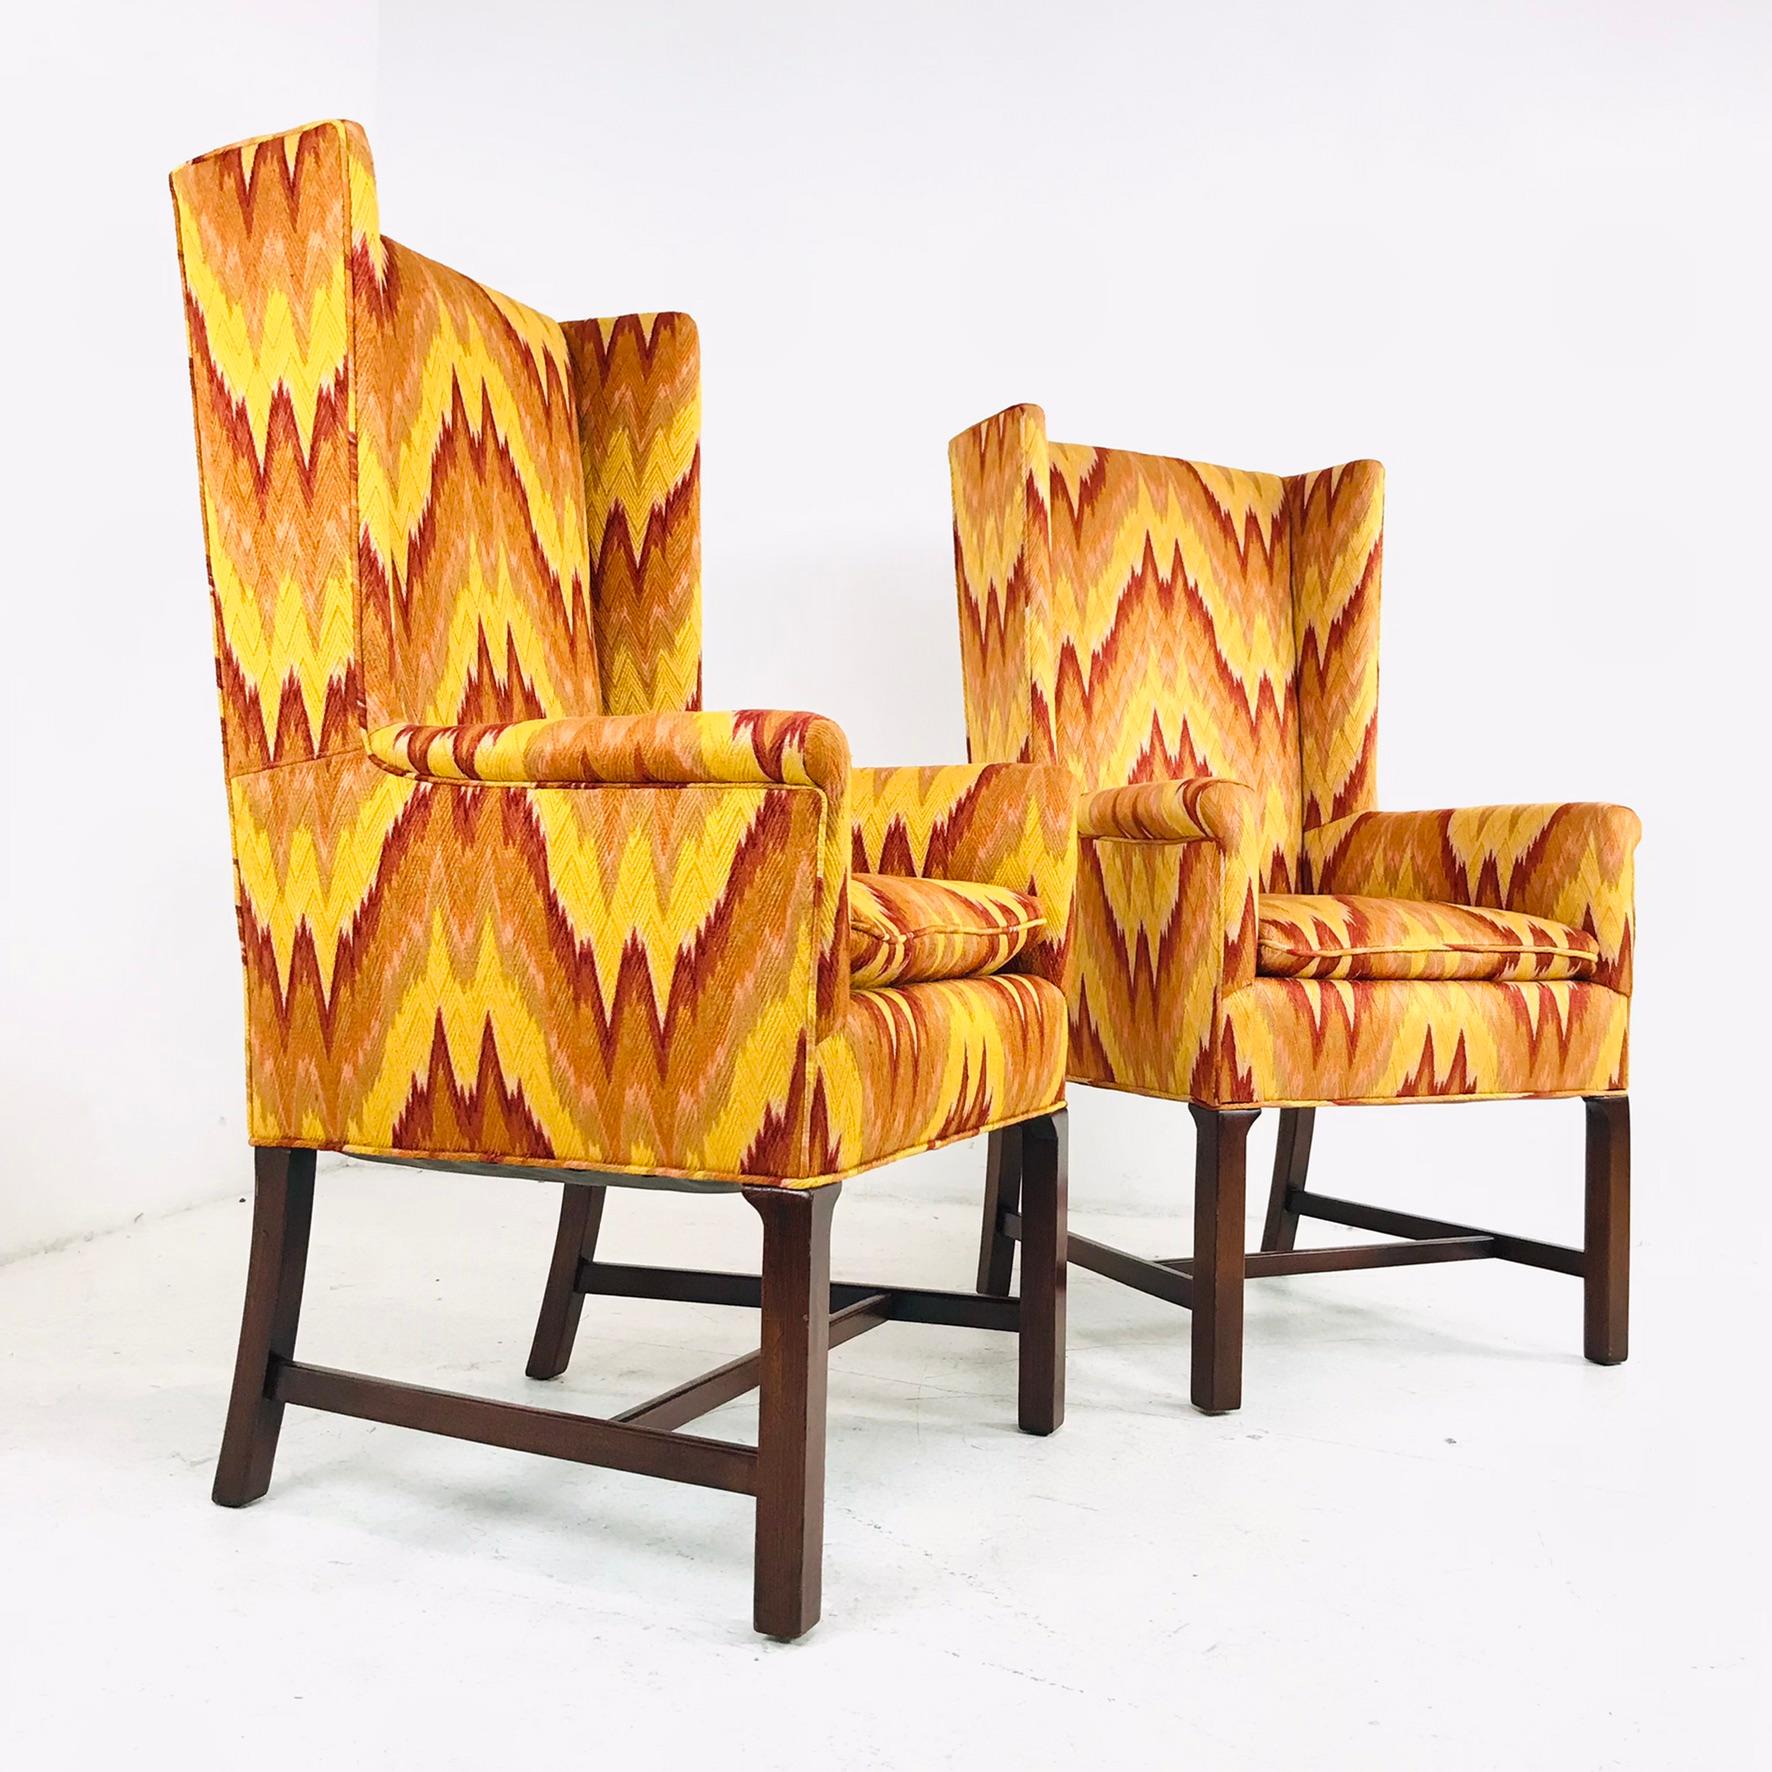 Amazing pair! These high back chairs are done in a bold orange and red flame stitch. Down filled seat cushions - upholstery is immaculate!